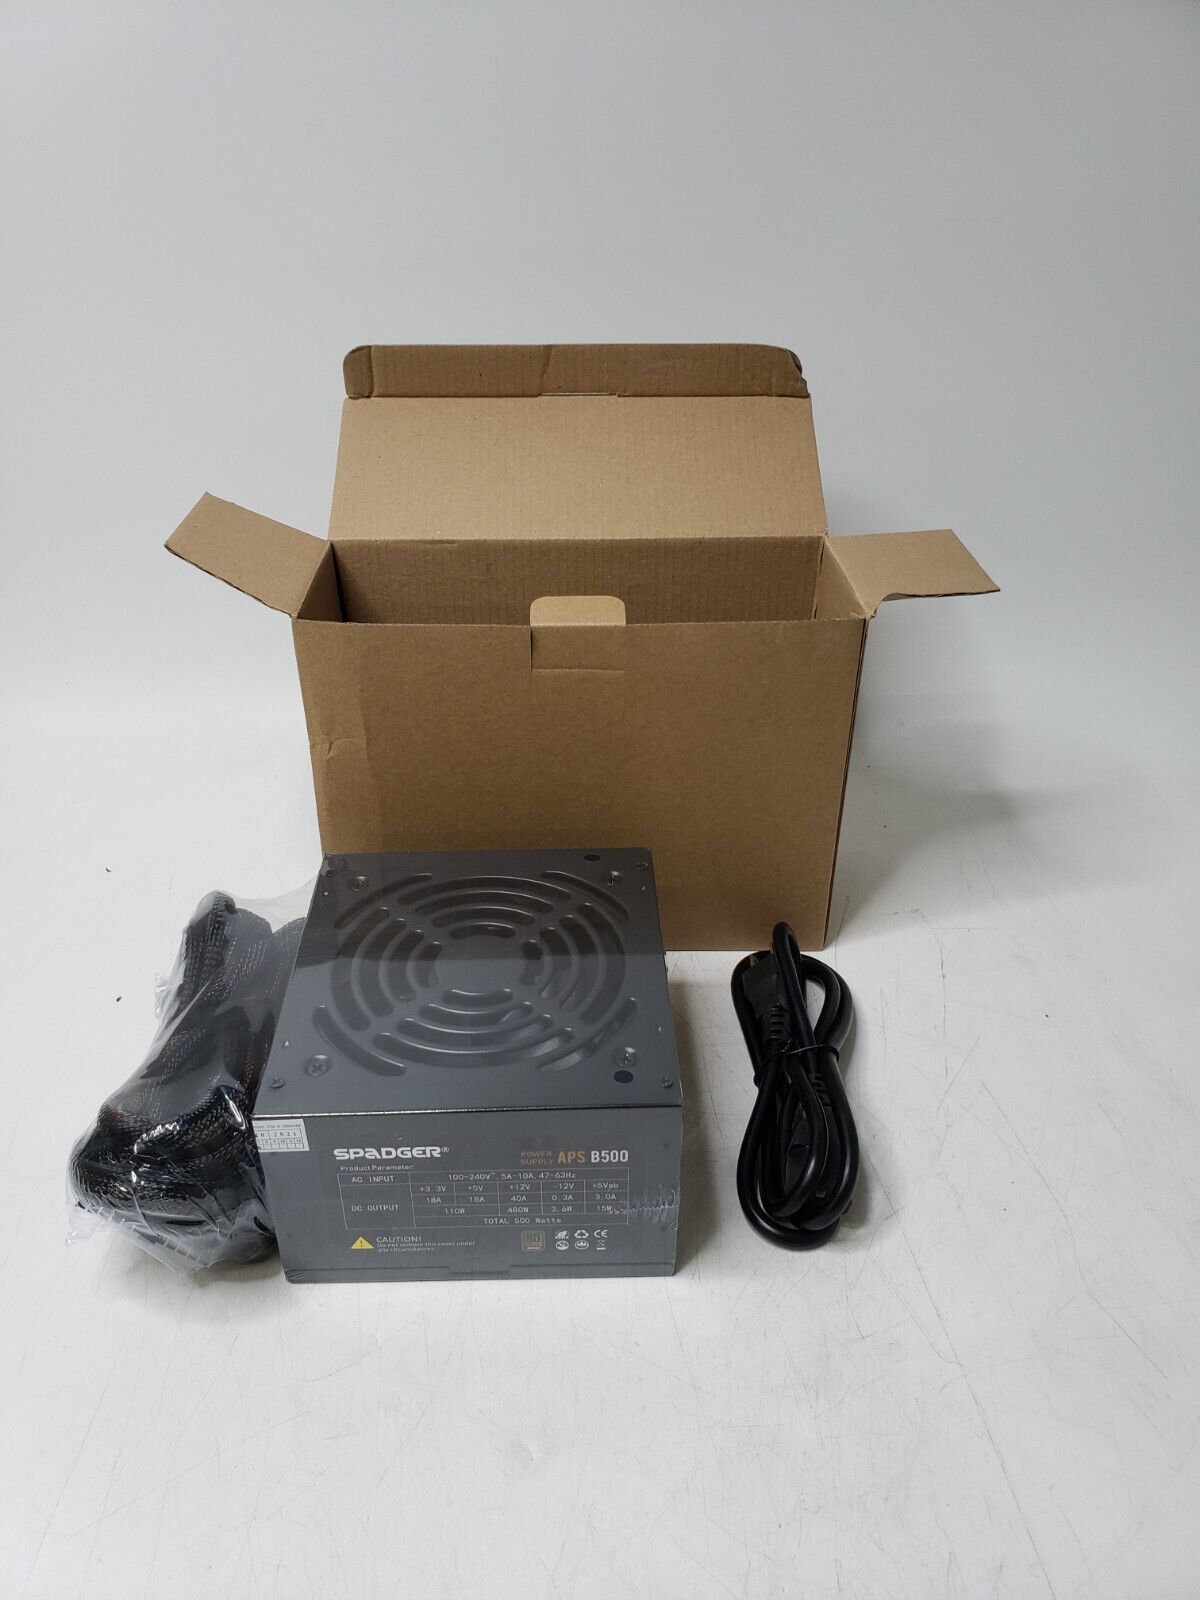 Spadger APS B500 500W ATX power supply NEW IN BOX W/ Power Cable